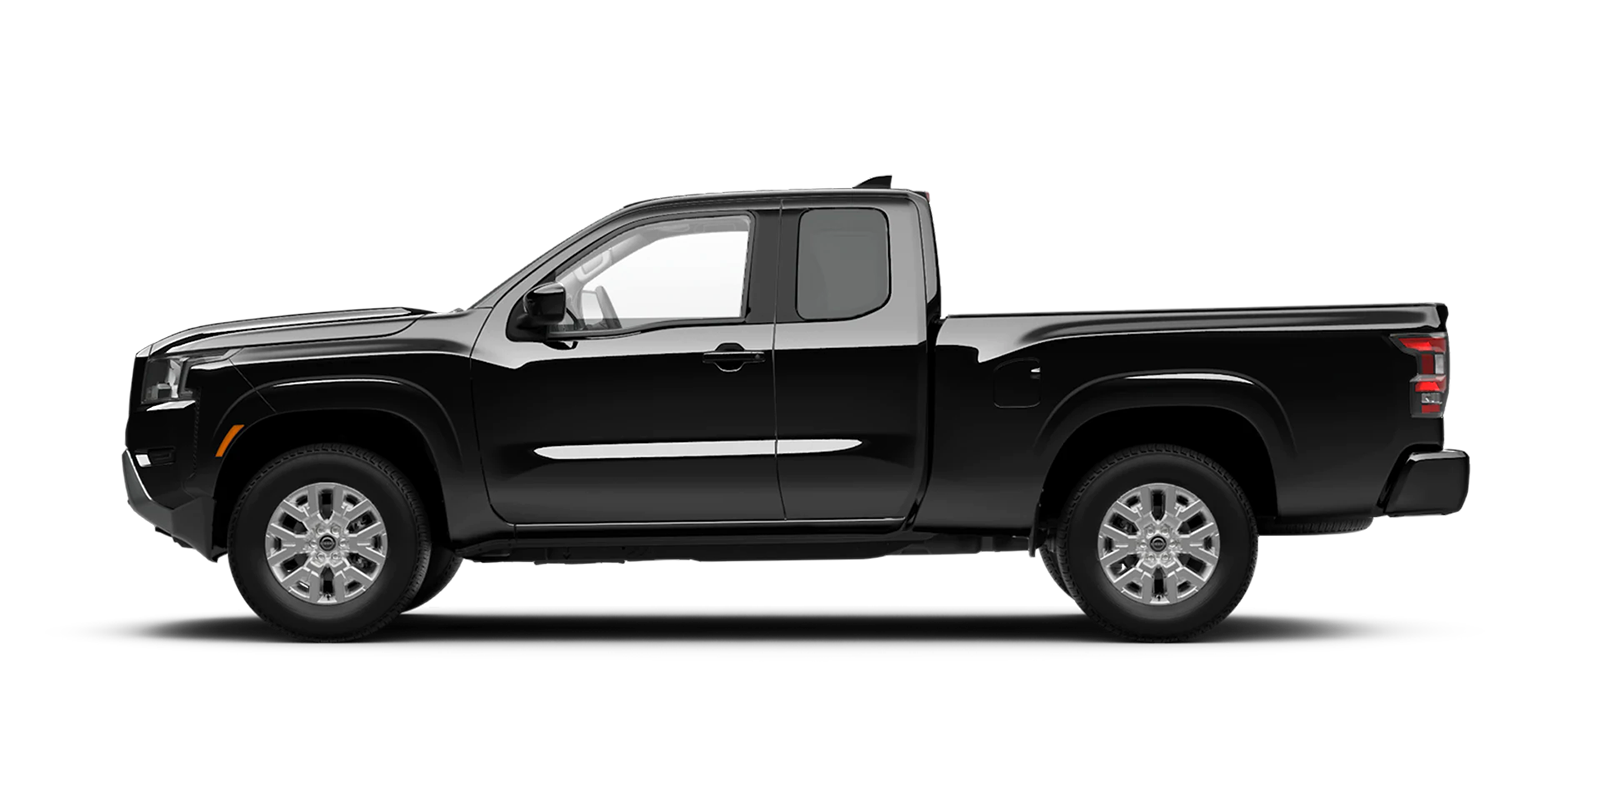 2022 Frontier King Cab SV 4x4 in Super Black | Fort Collins Nissan in Fort Collins CO